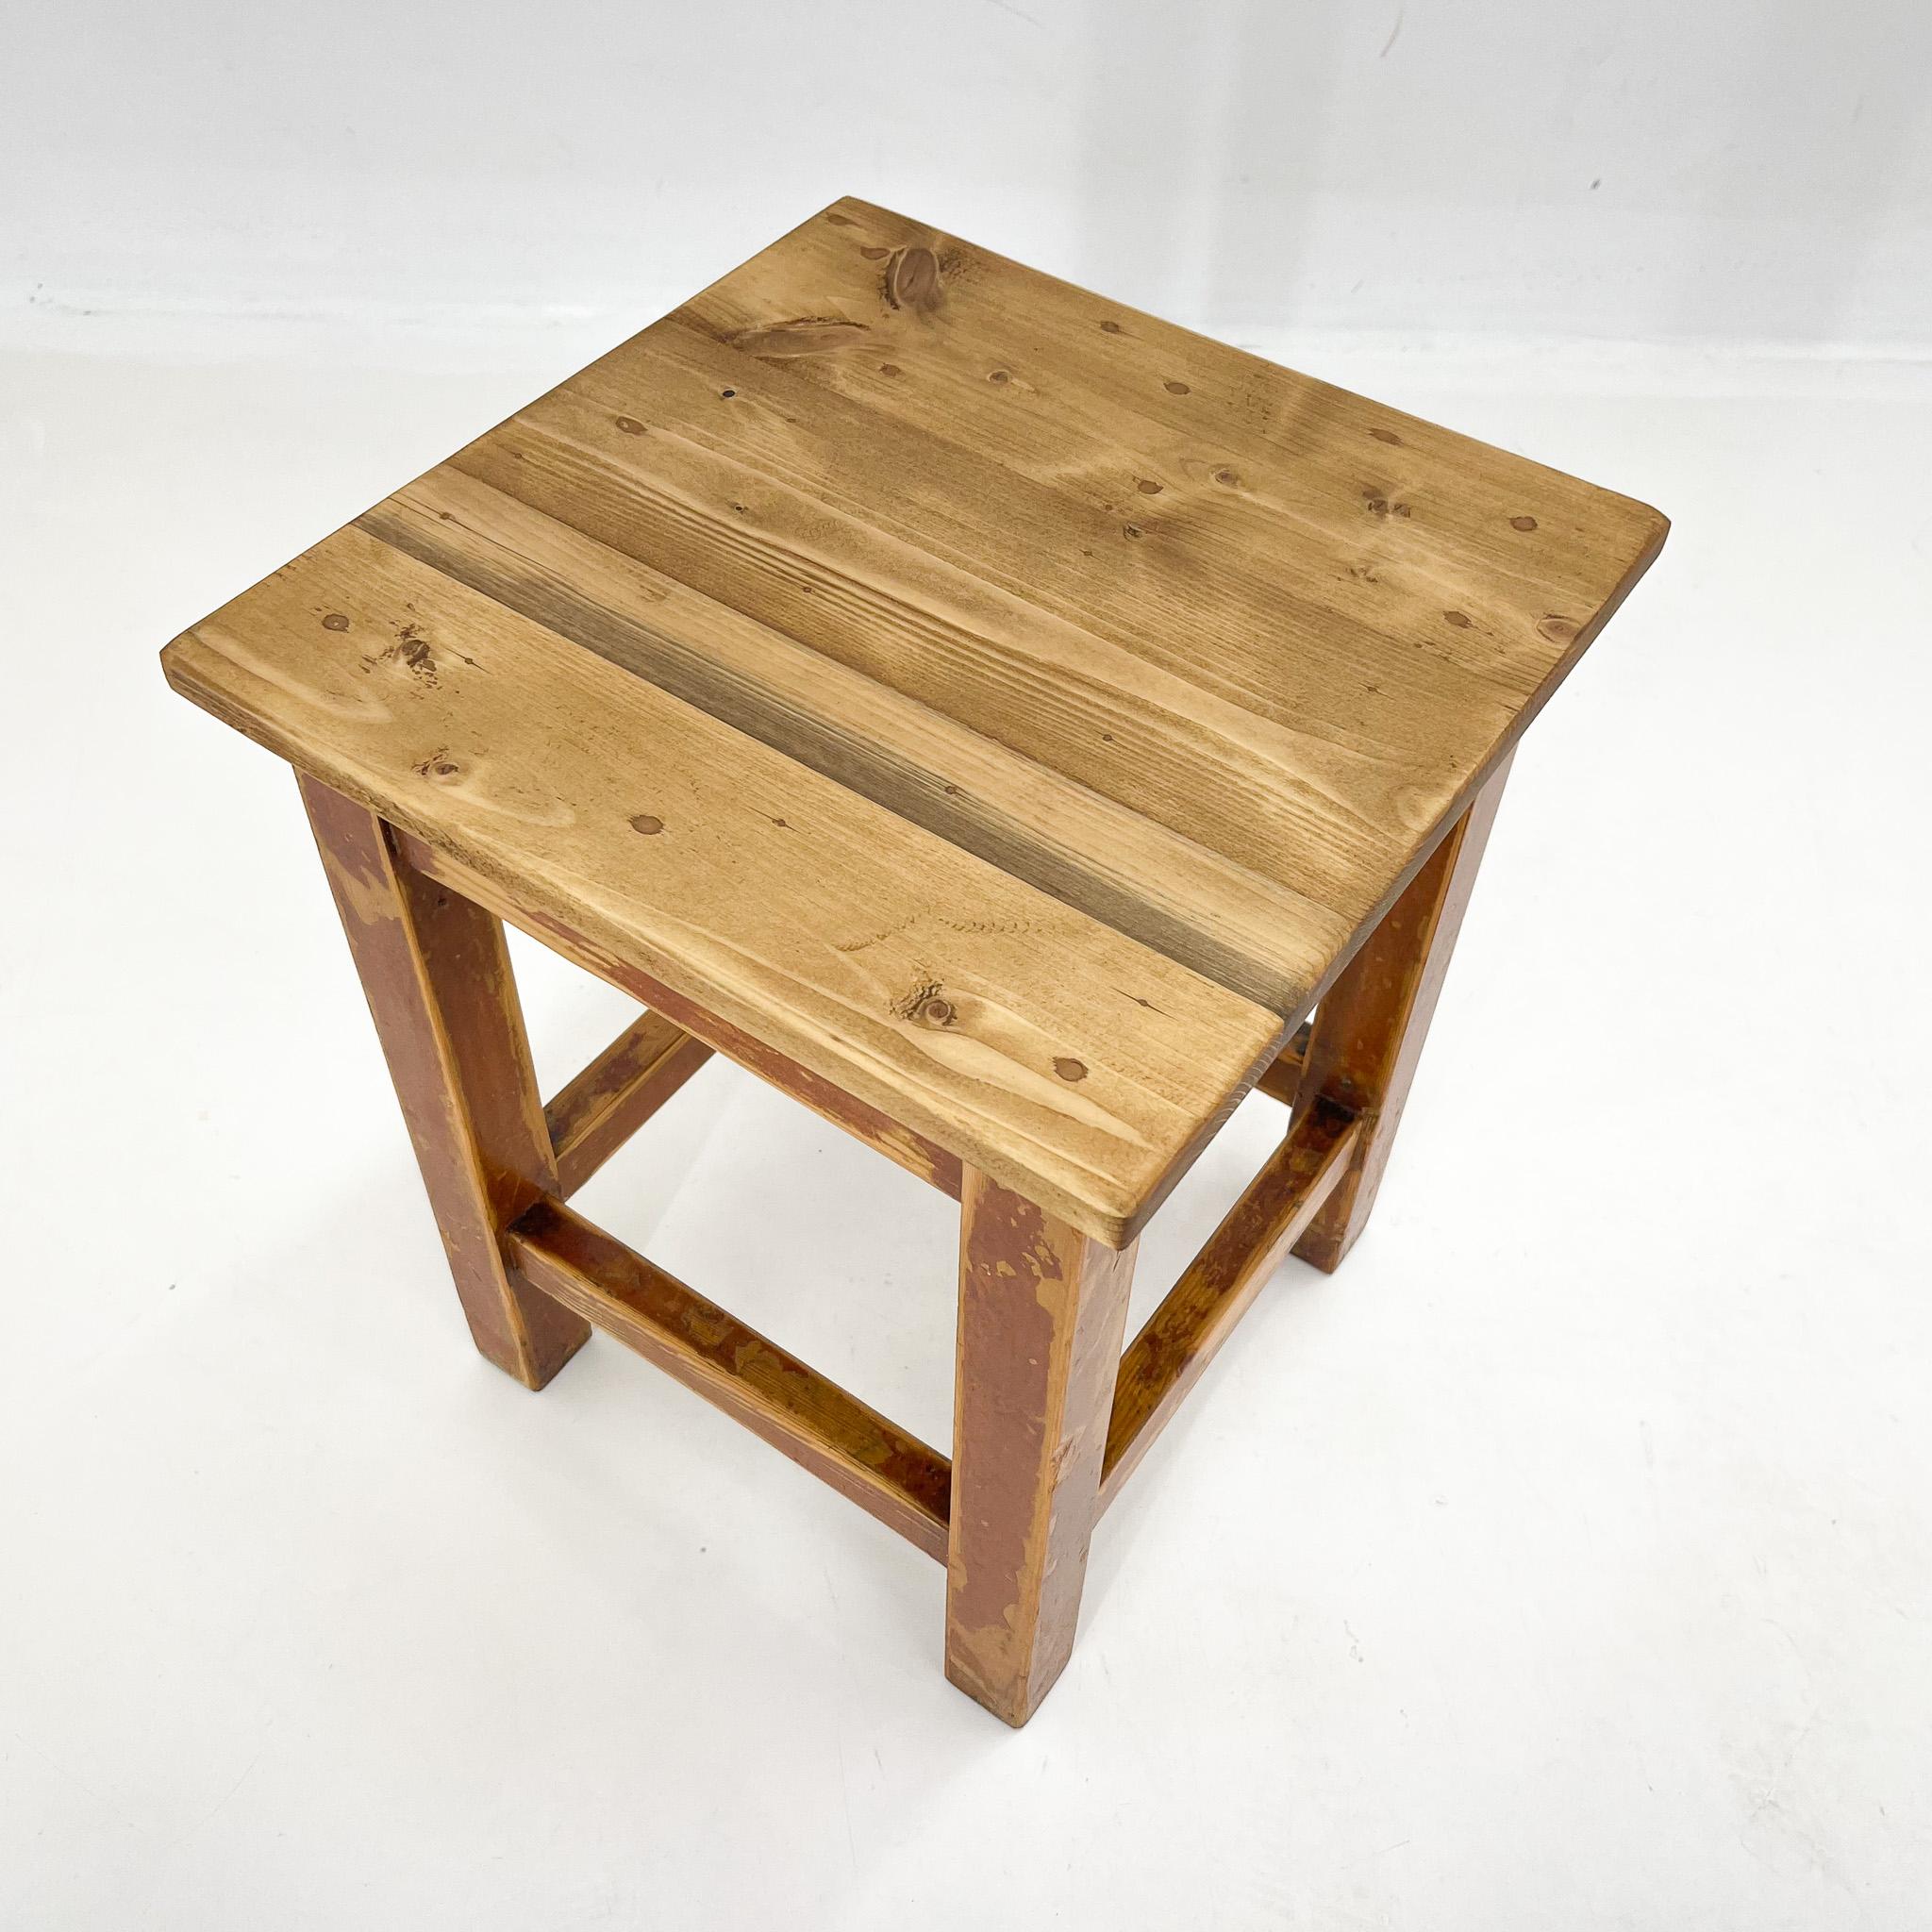 20th Century 1950s Square Wooden Stool of Footrest with Original Paint, Czechoslovakia For Sale